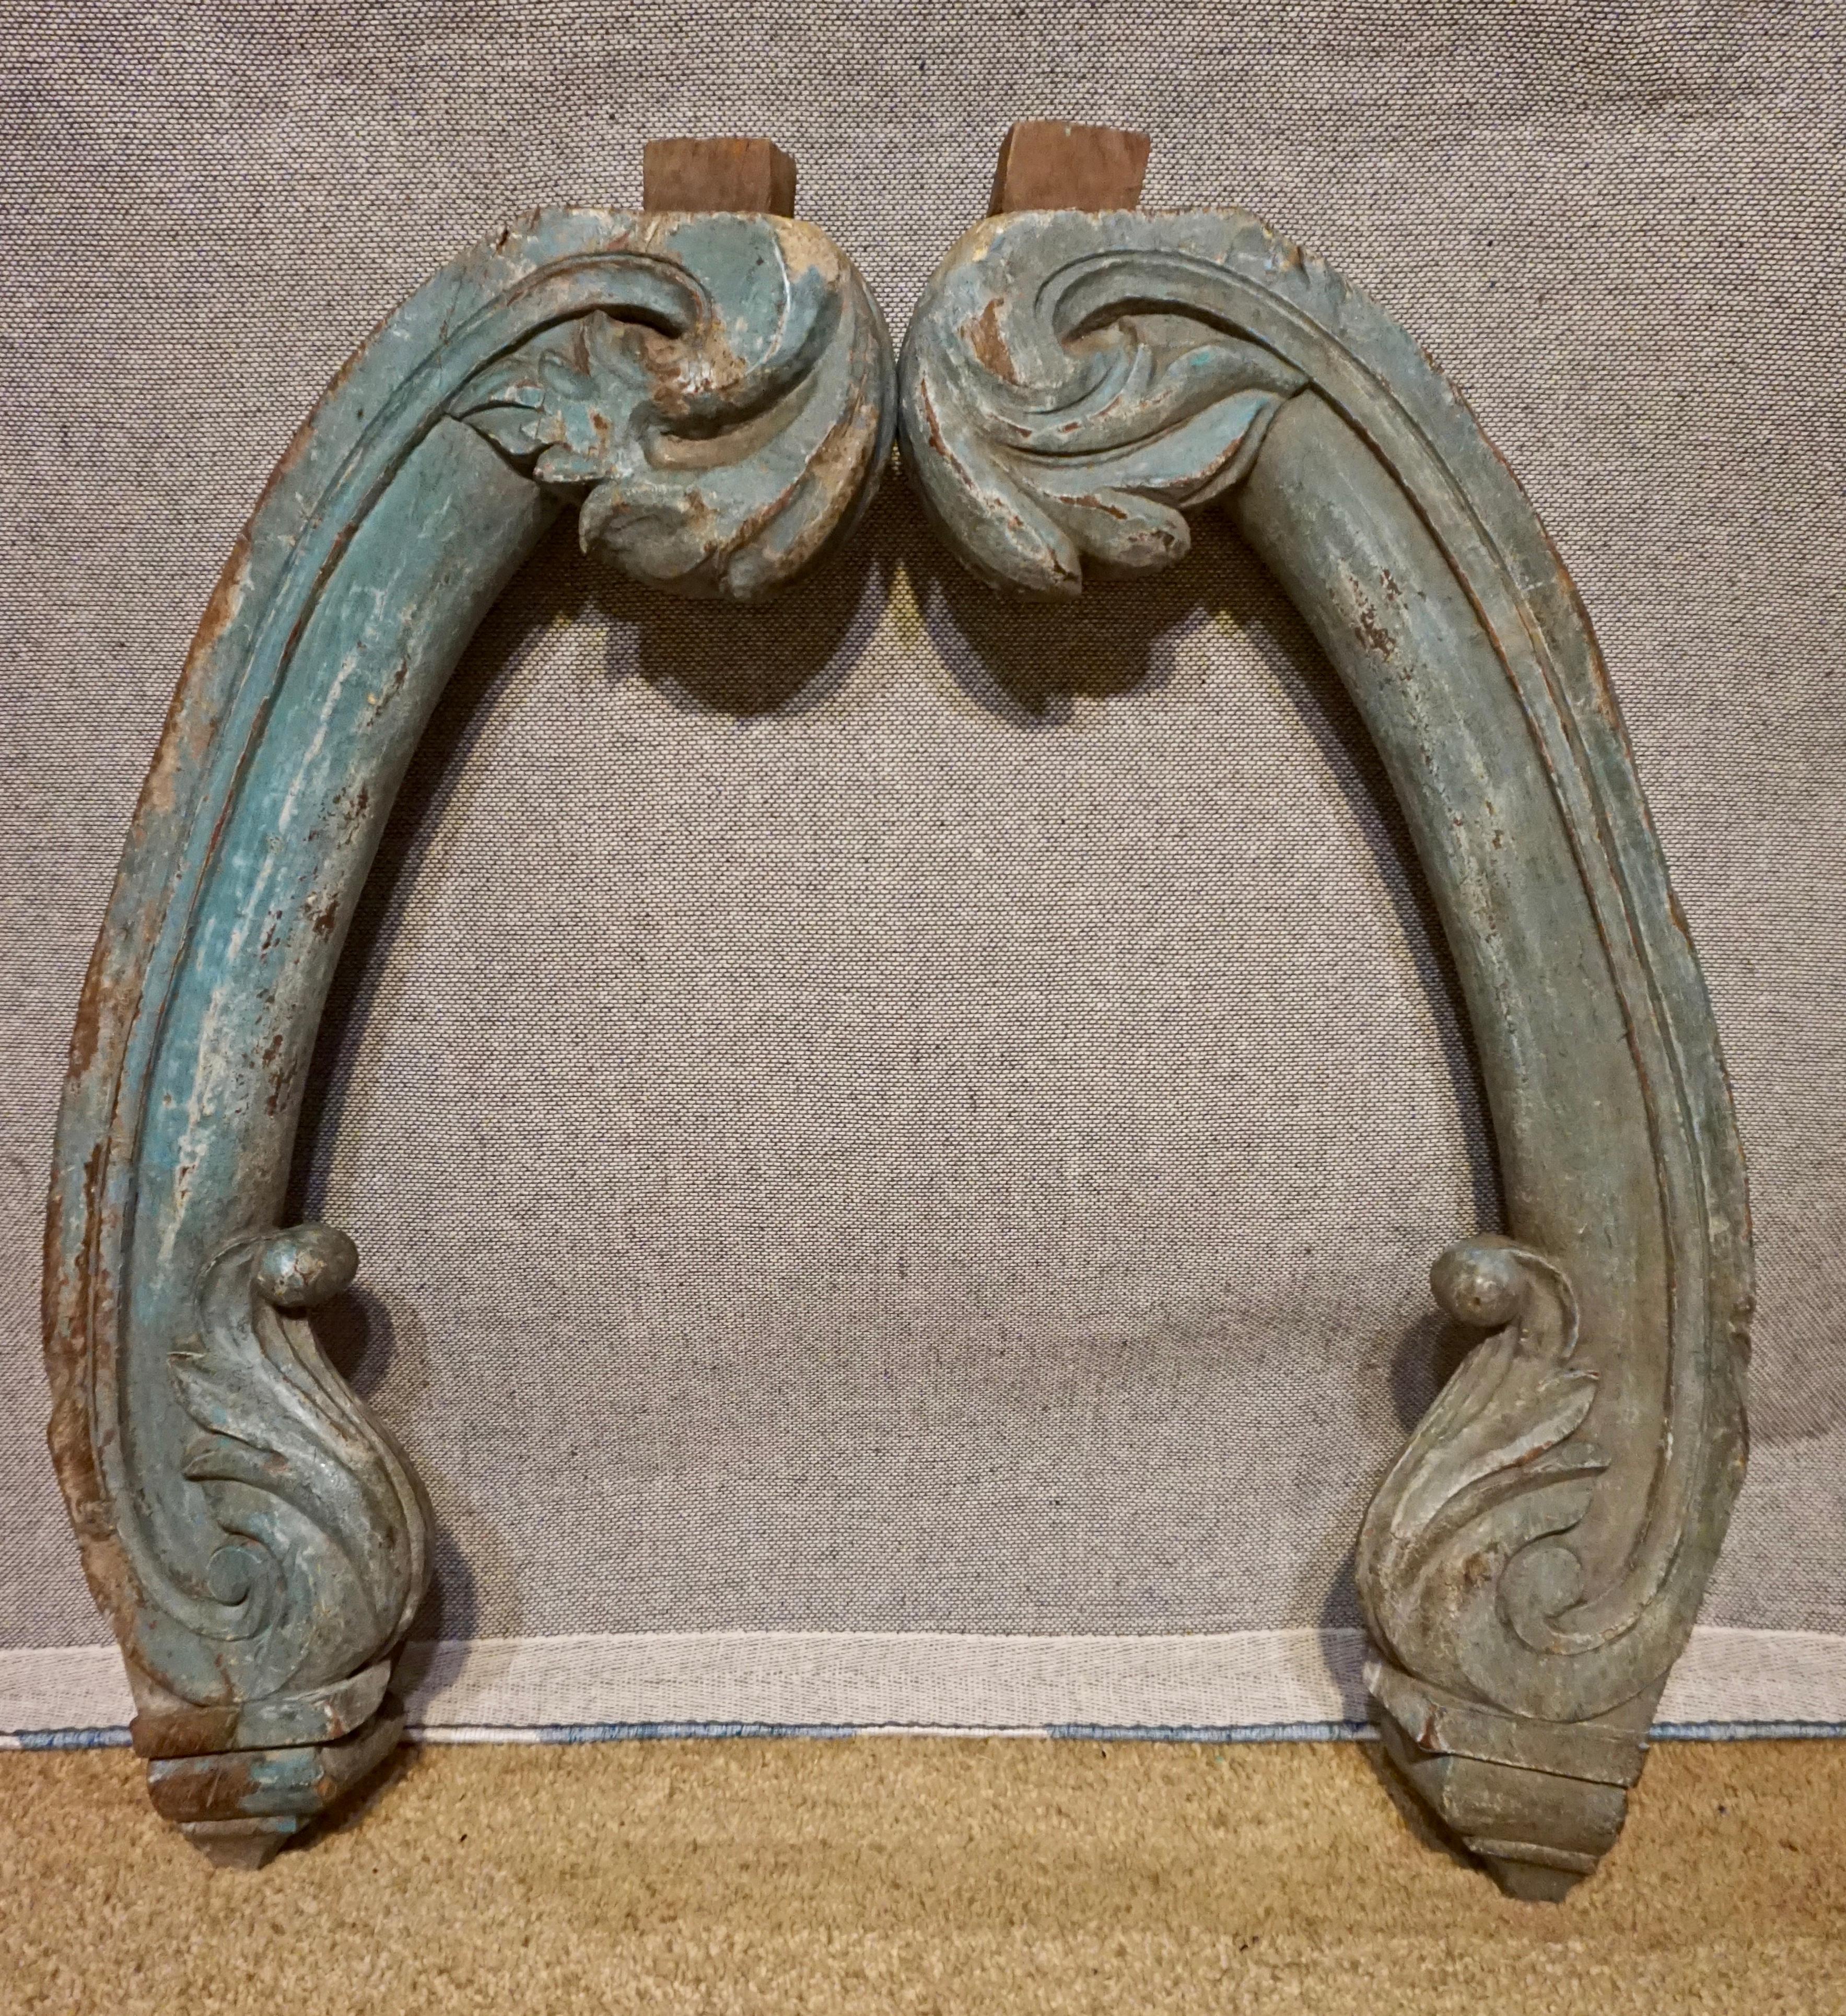 Large hand carved corbels made from solid teak with original paint and rustic details. Originally used under balcony. These are heavy duty and are shaped like scrolling elephant trunks. Original broad nail fixture can be seen, circa 1890s.

    